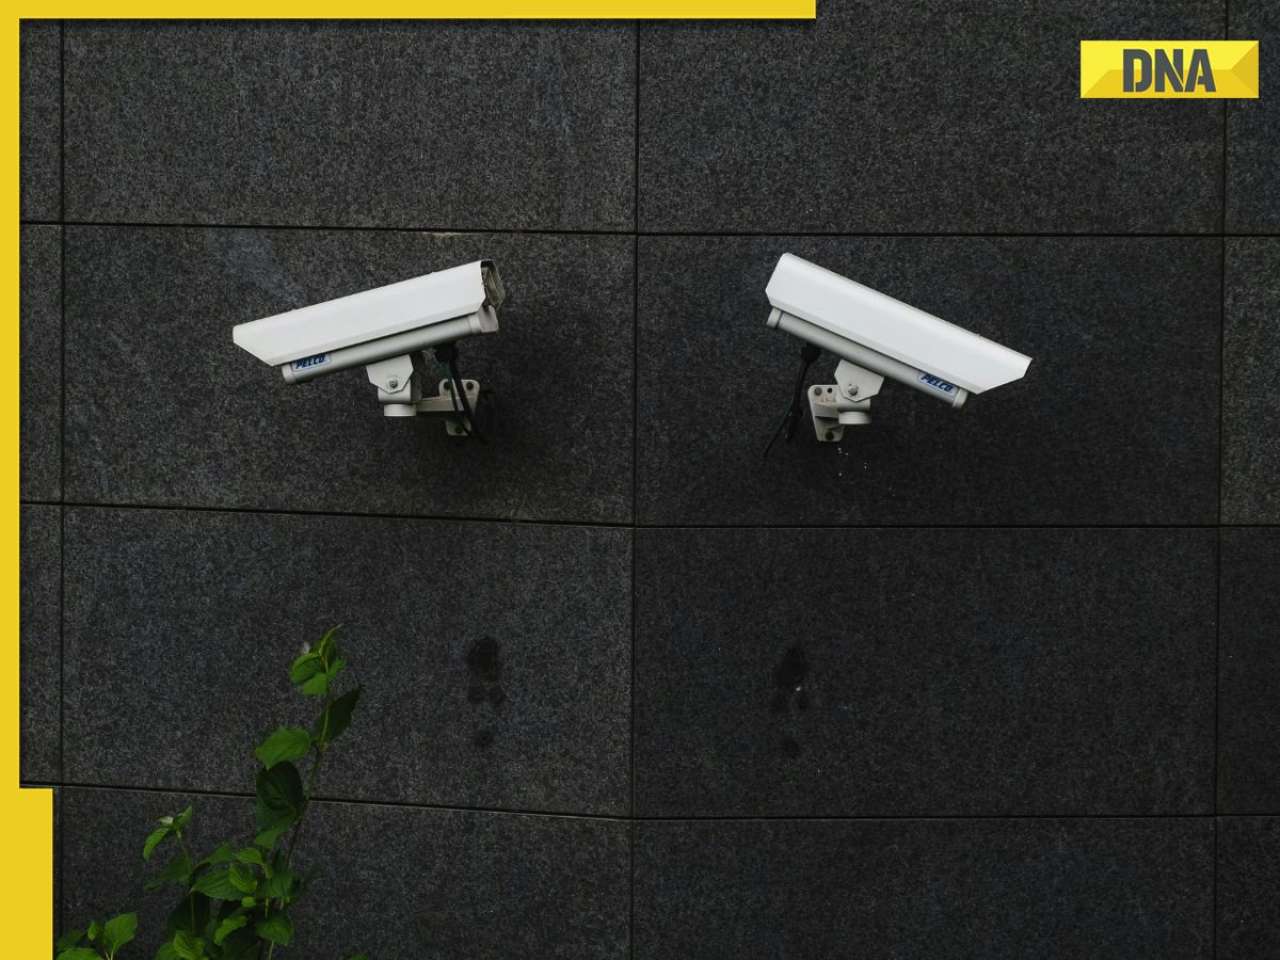 Indian government issues advisory on CCTV security, asks ministries to avoid brands…